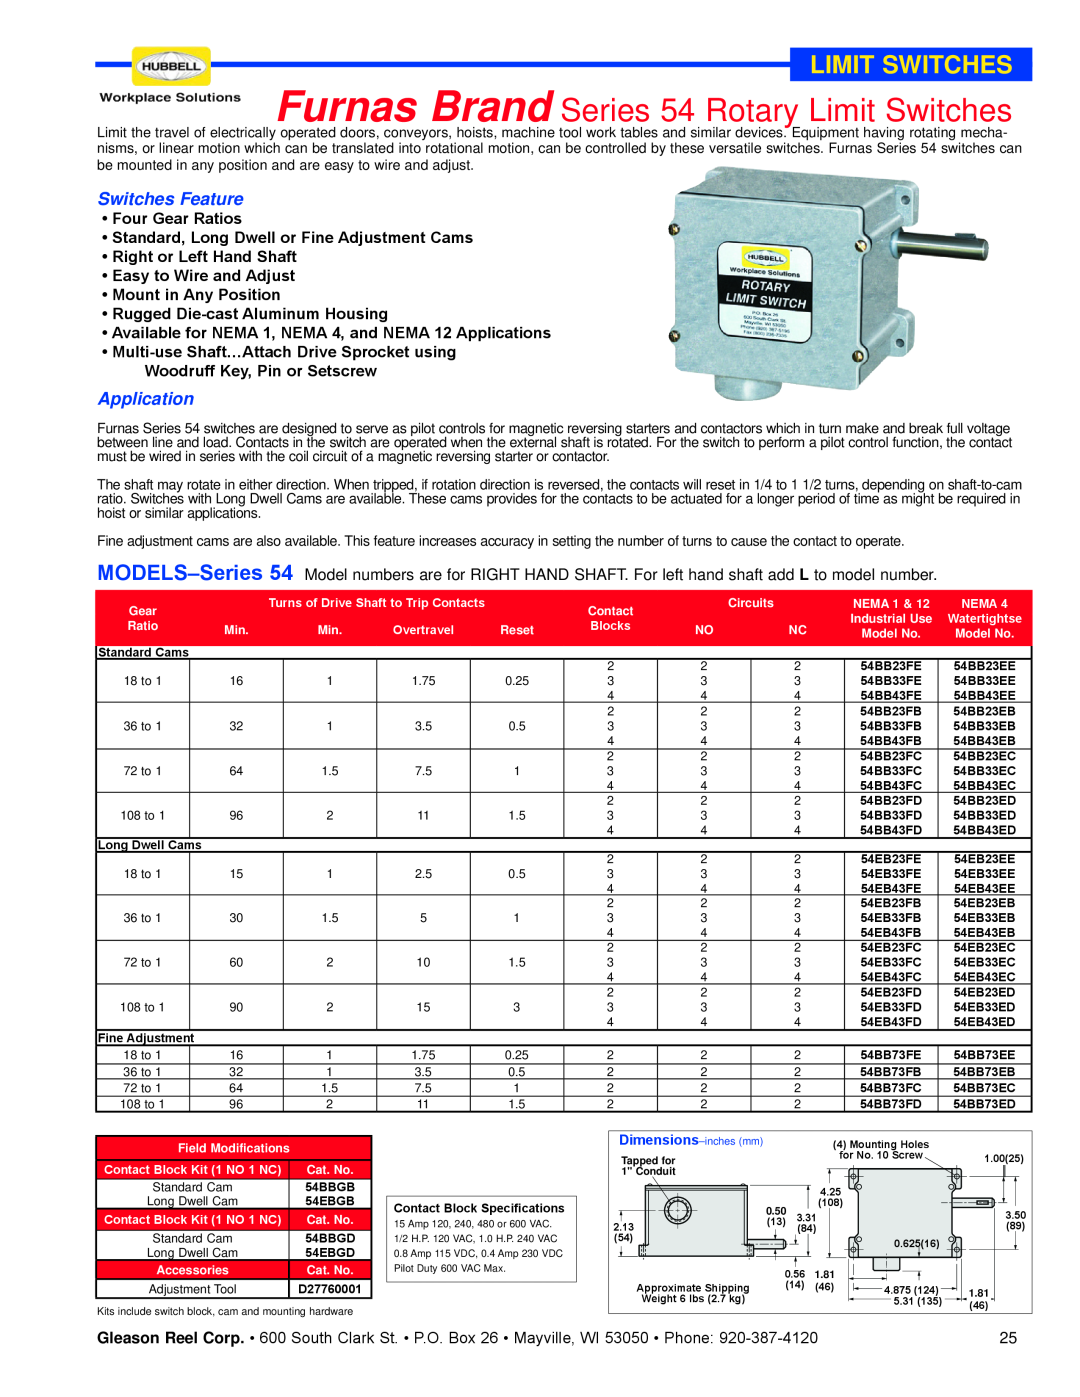 Hubbell dimensions Furnas Brand Series 54 Rotary Limit Switches, Switches Feature, Application 